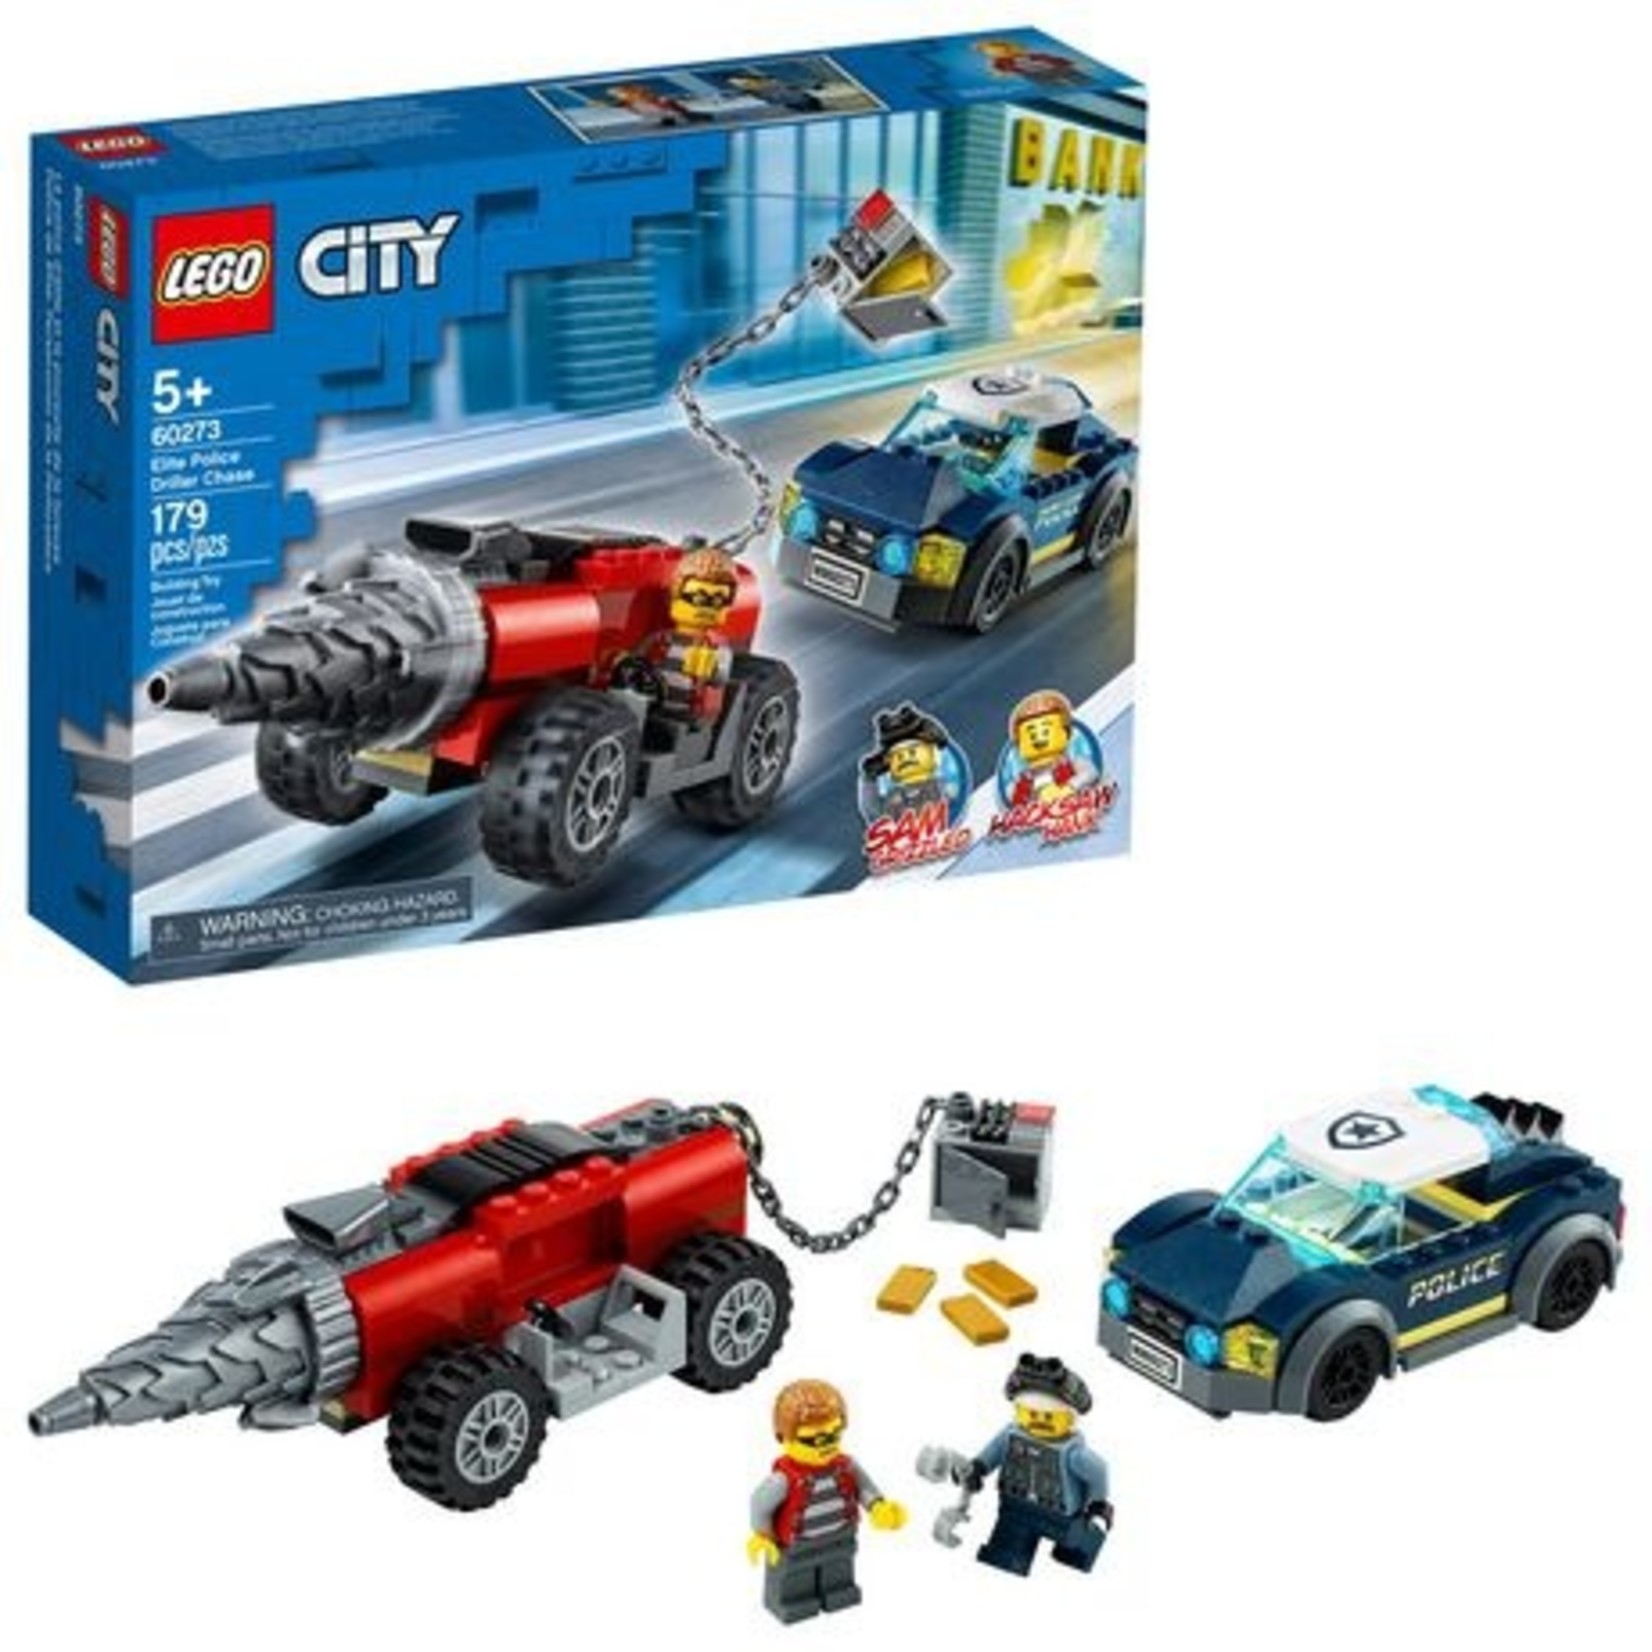 LEGO LEGO City Police Police Driller Chase 60273